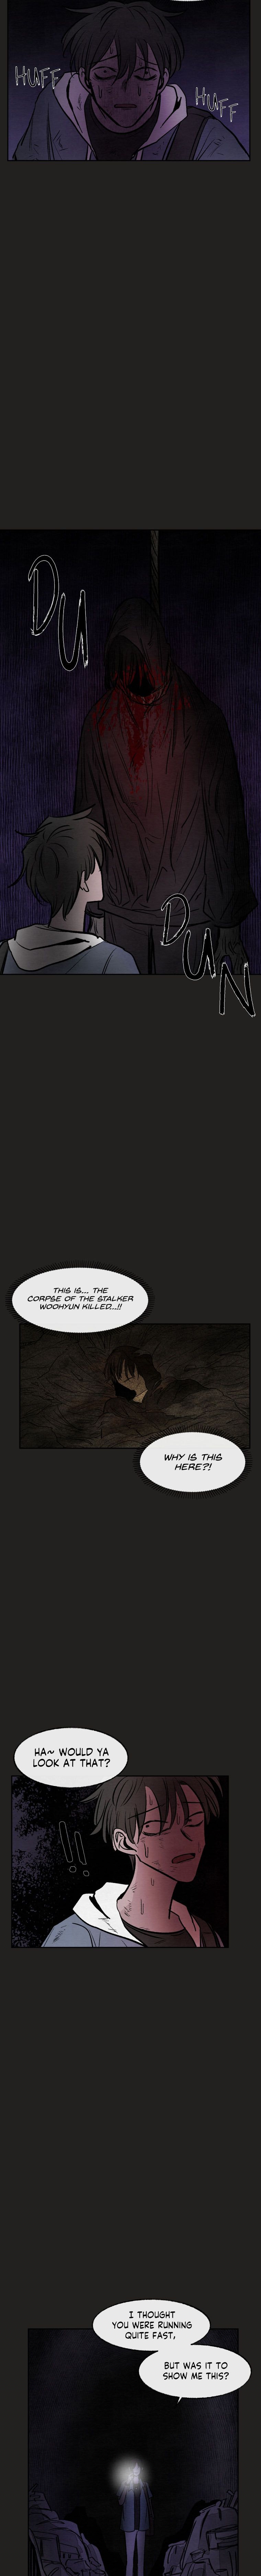 Devil’s Editing Chapter 15 - Page 4